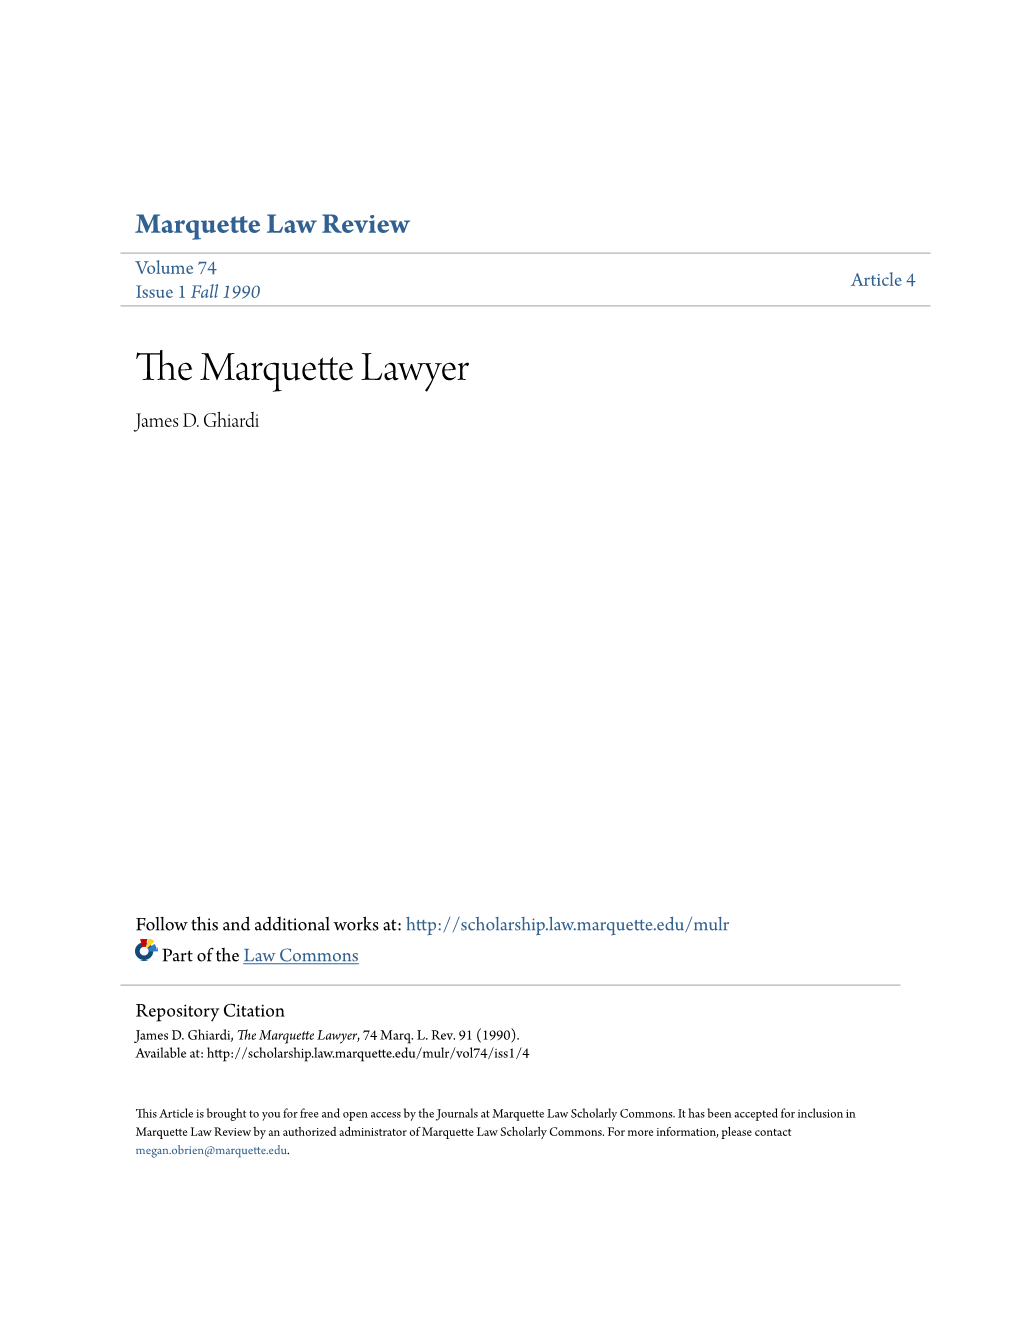 The Marquette Lawyer, 74 Marq